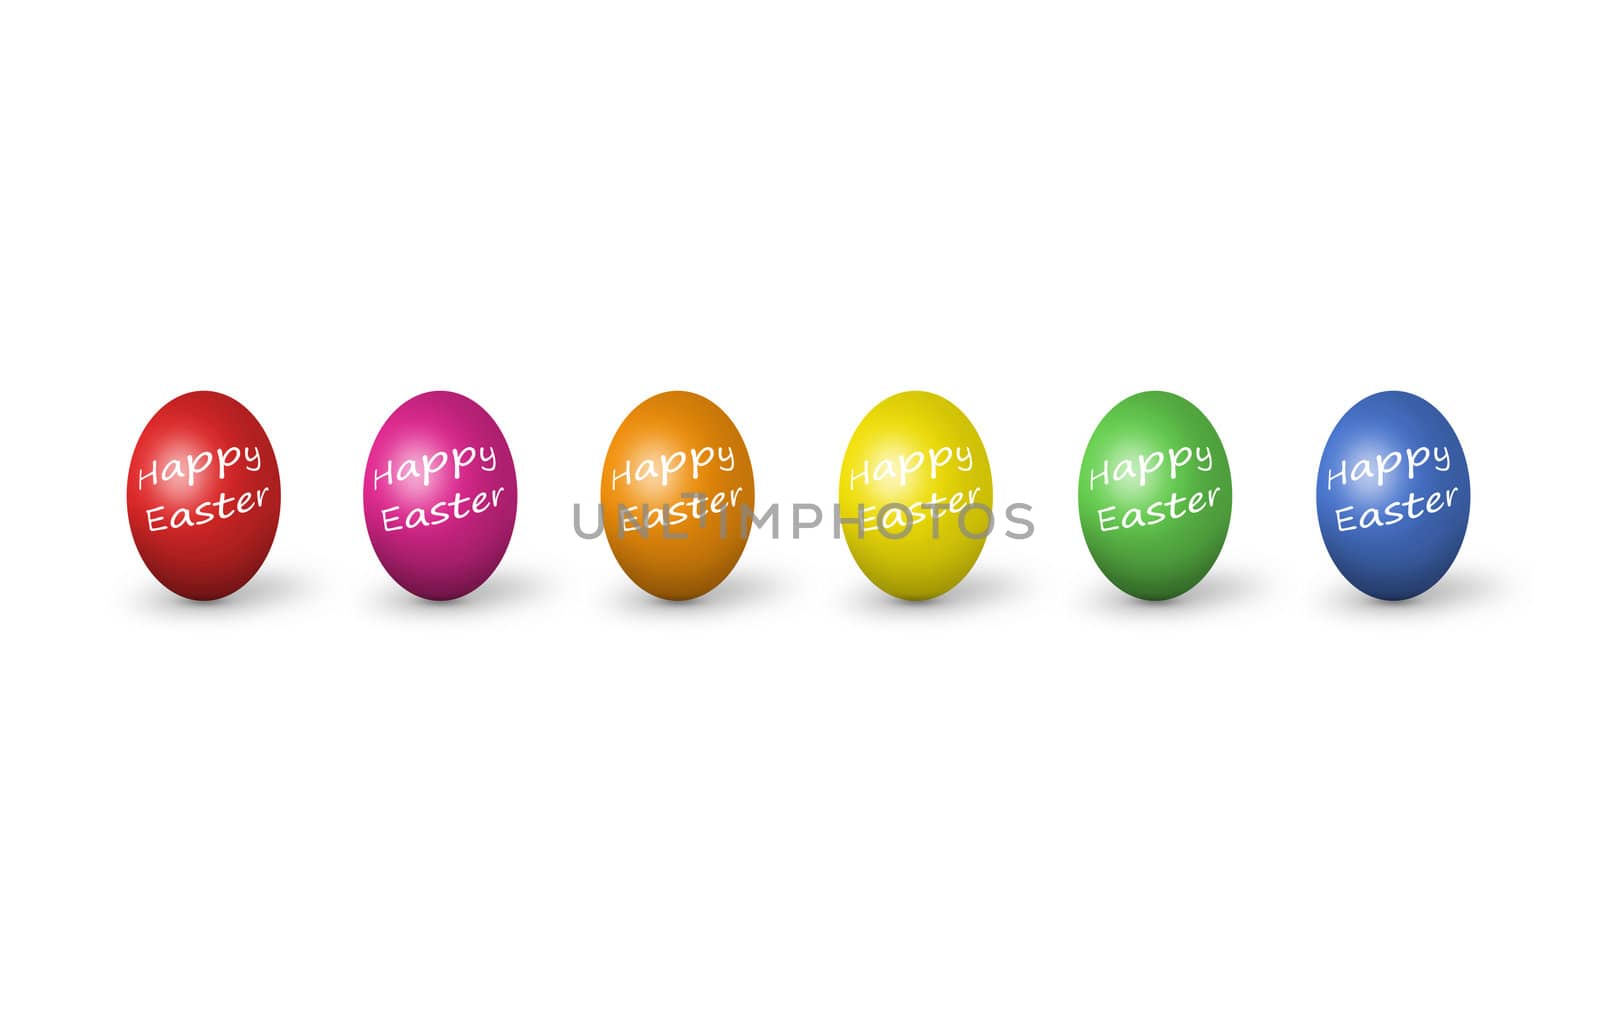 Colorful easter eggs isolated on white background